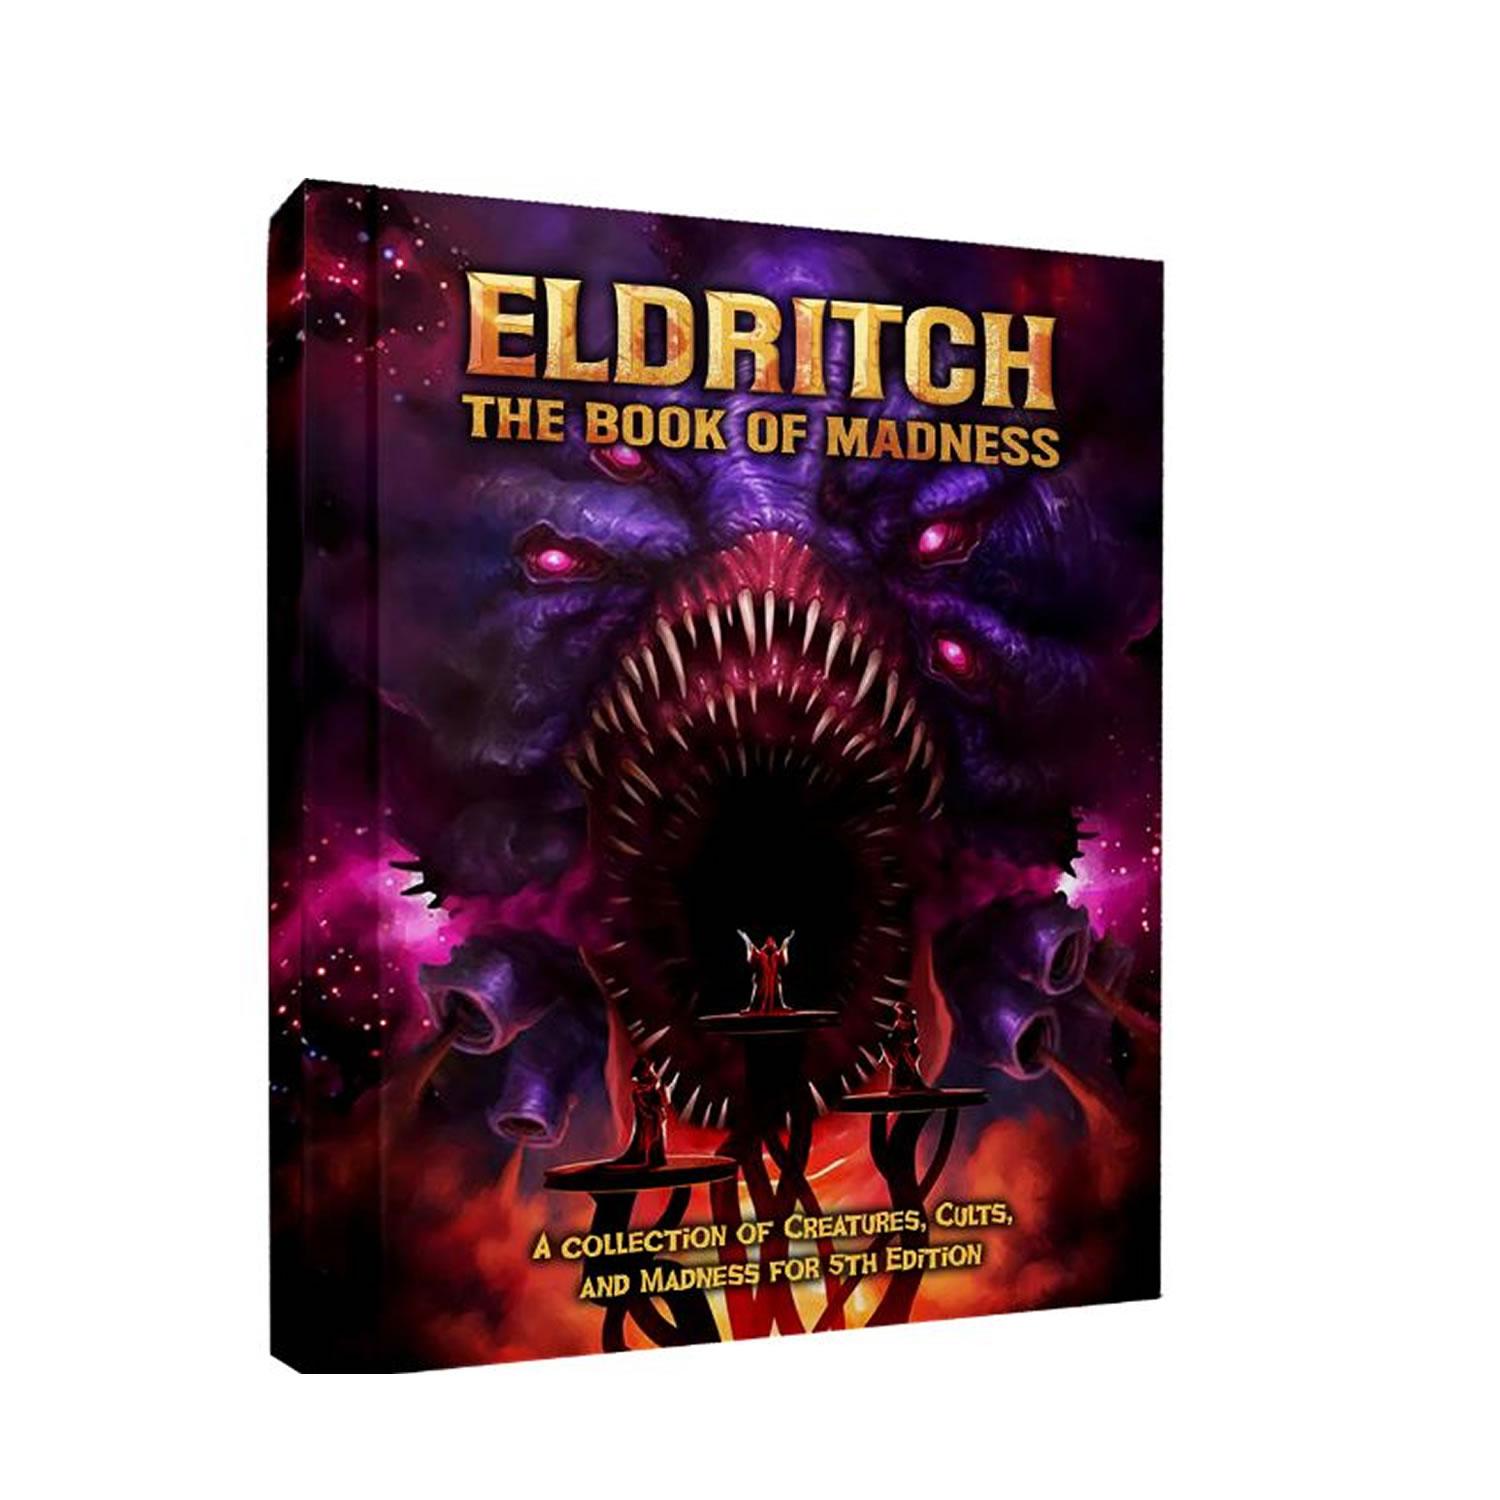 Eldritch The book of Madness